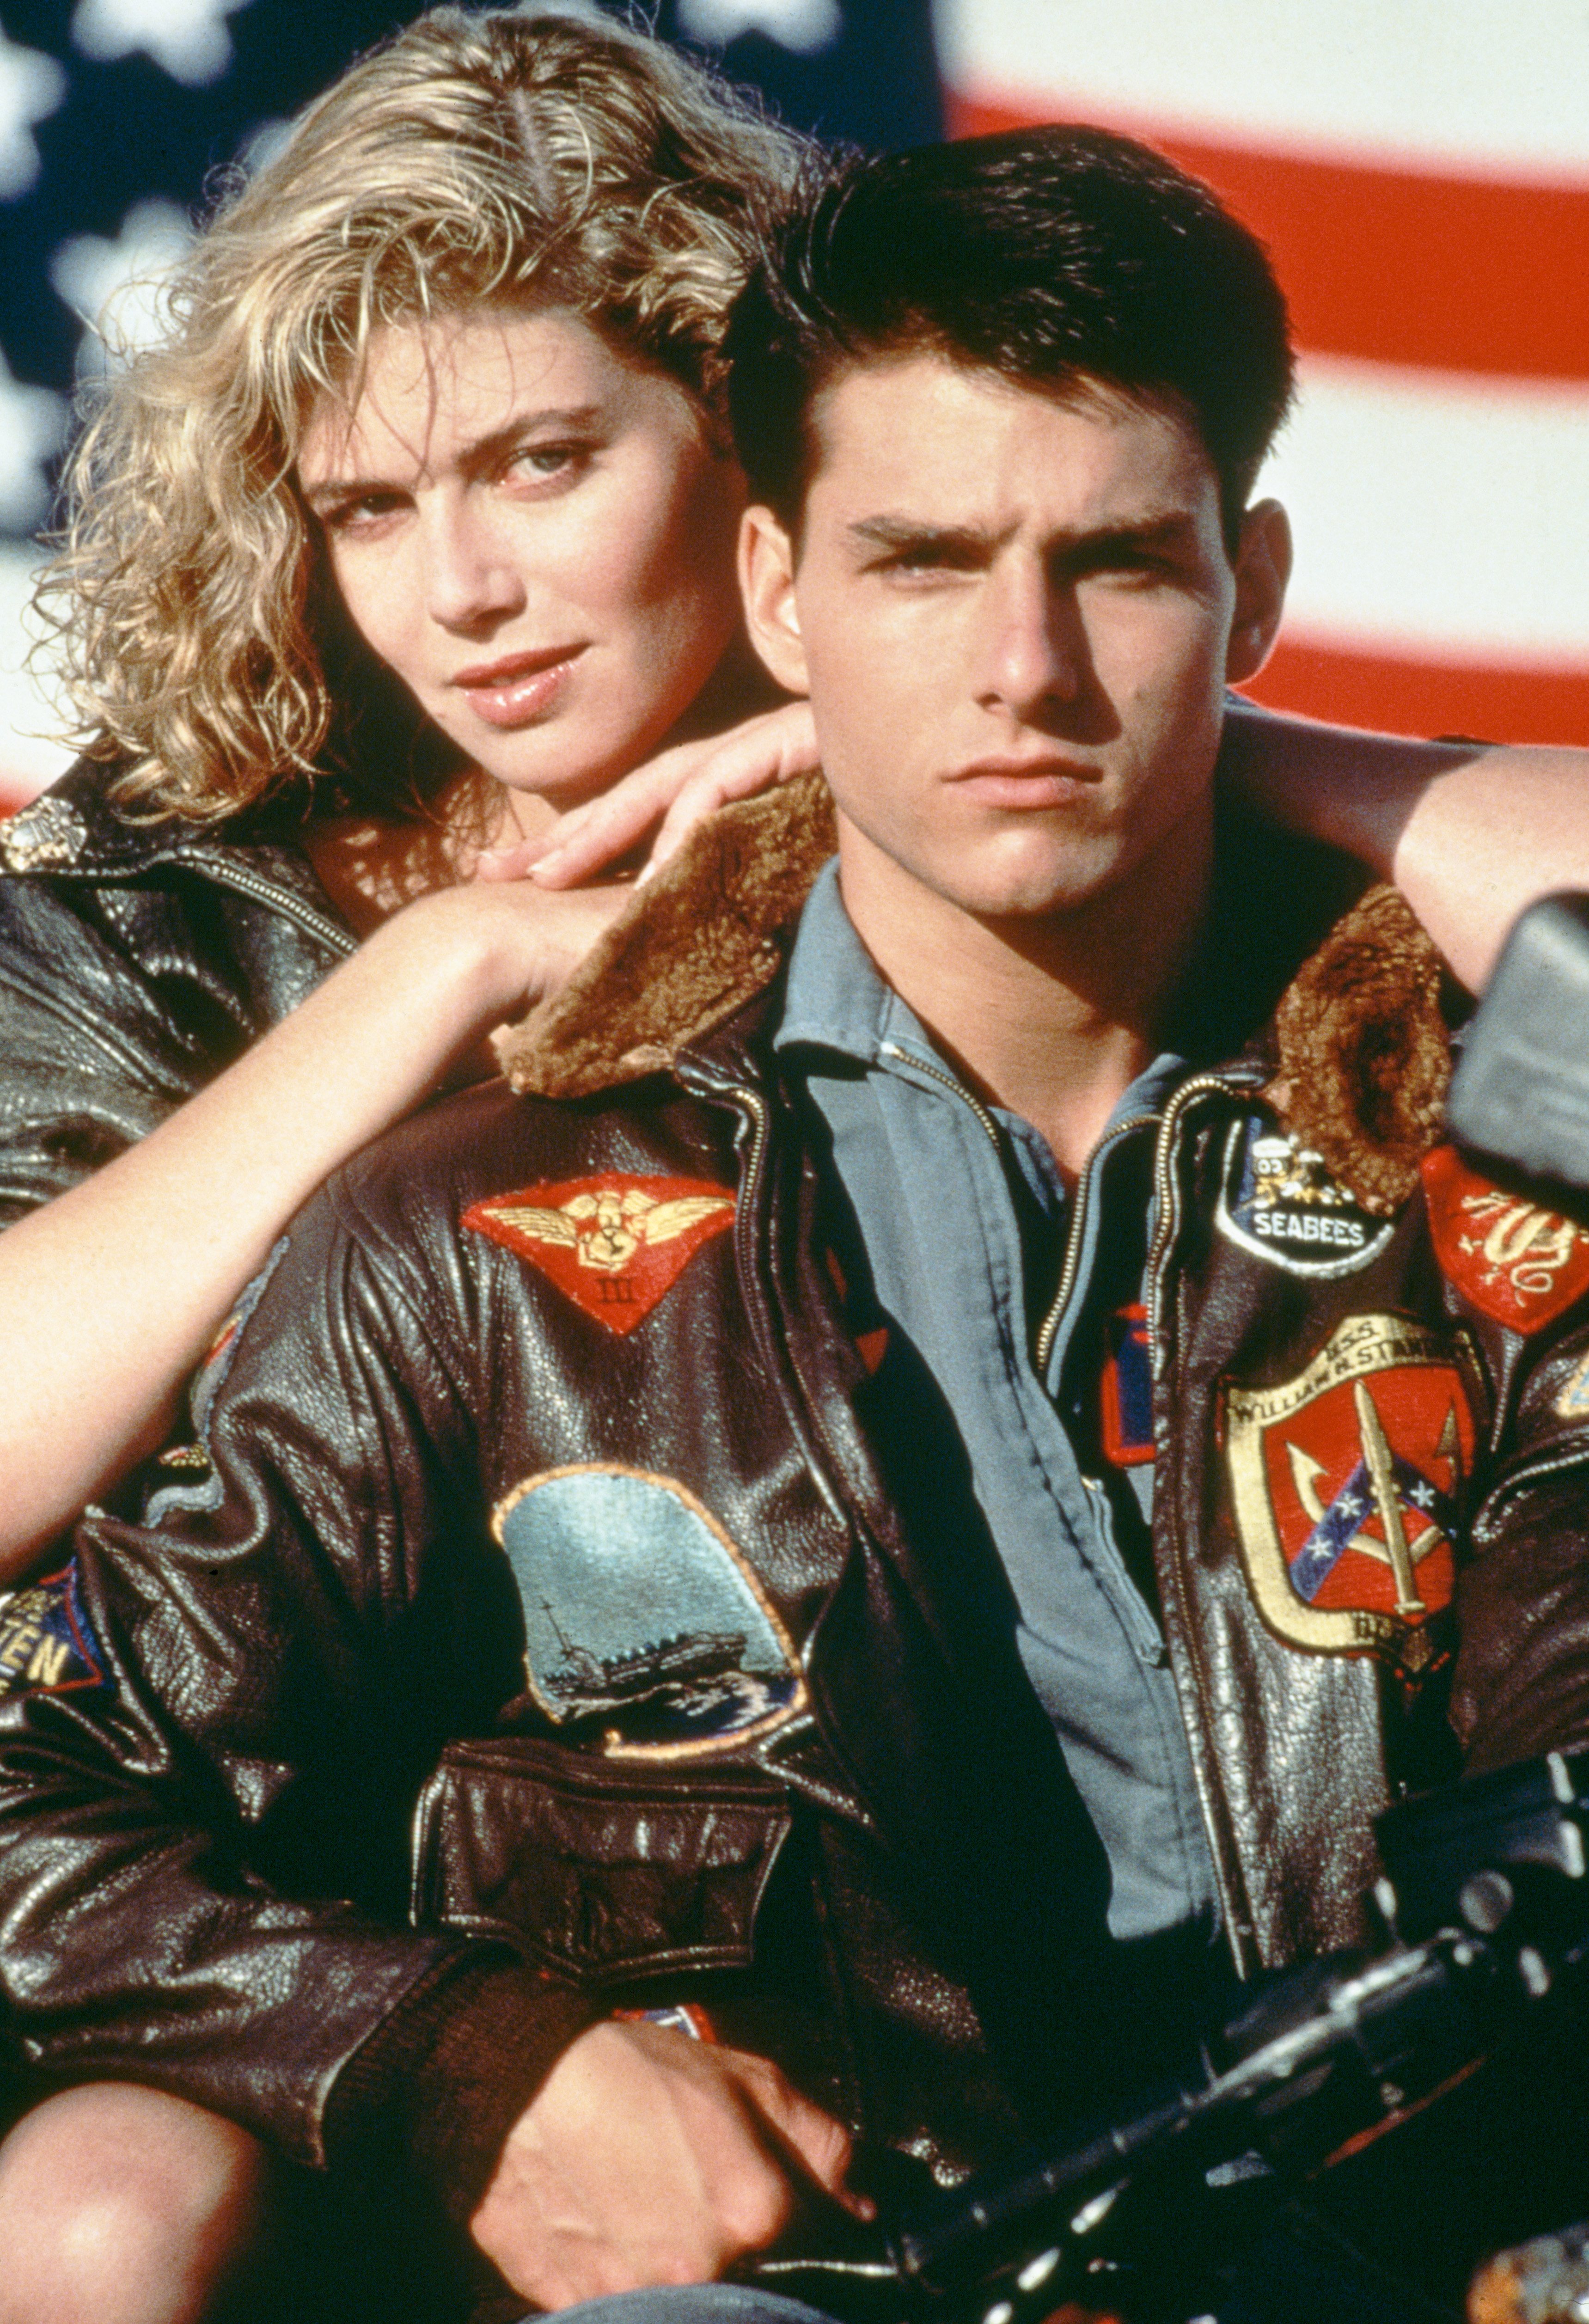 Tom Cruis as Lieutenant Pete 'Maverick' Mitchell and Kelly McGillis as Charlotte 'Charlie' Blackwood in a promotional portrait for "Top Gun" | Photo: Paramount Pictures/Archive Photos/Getty Images